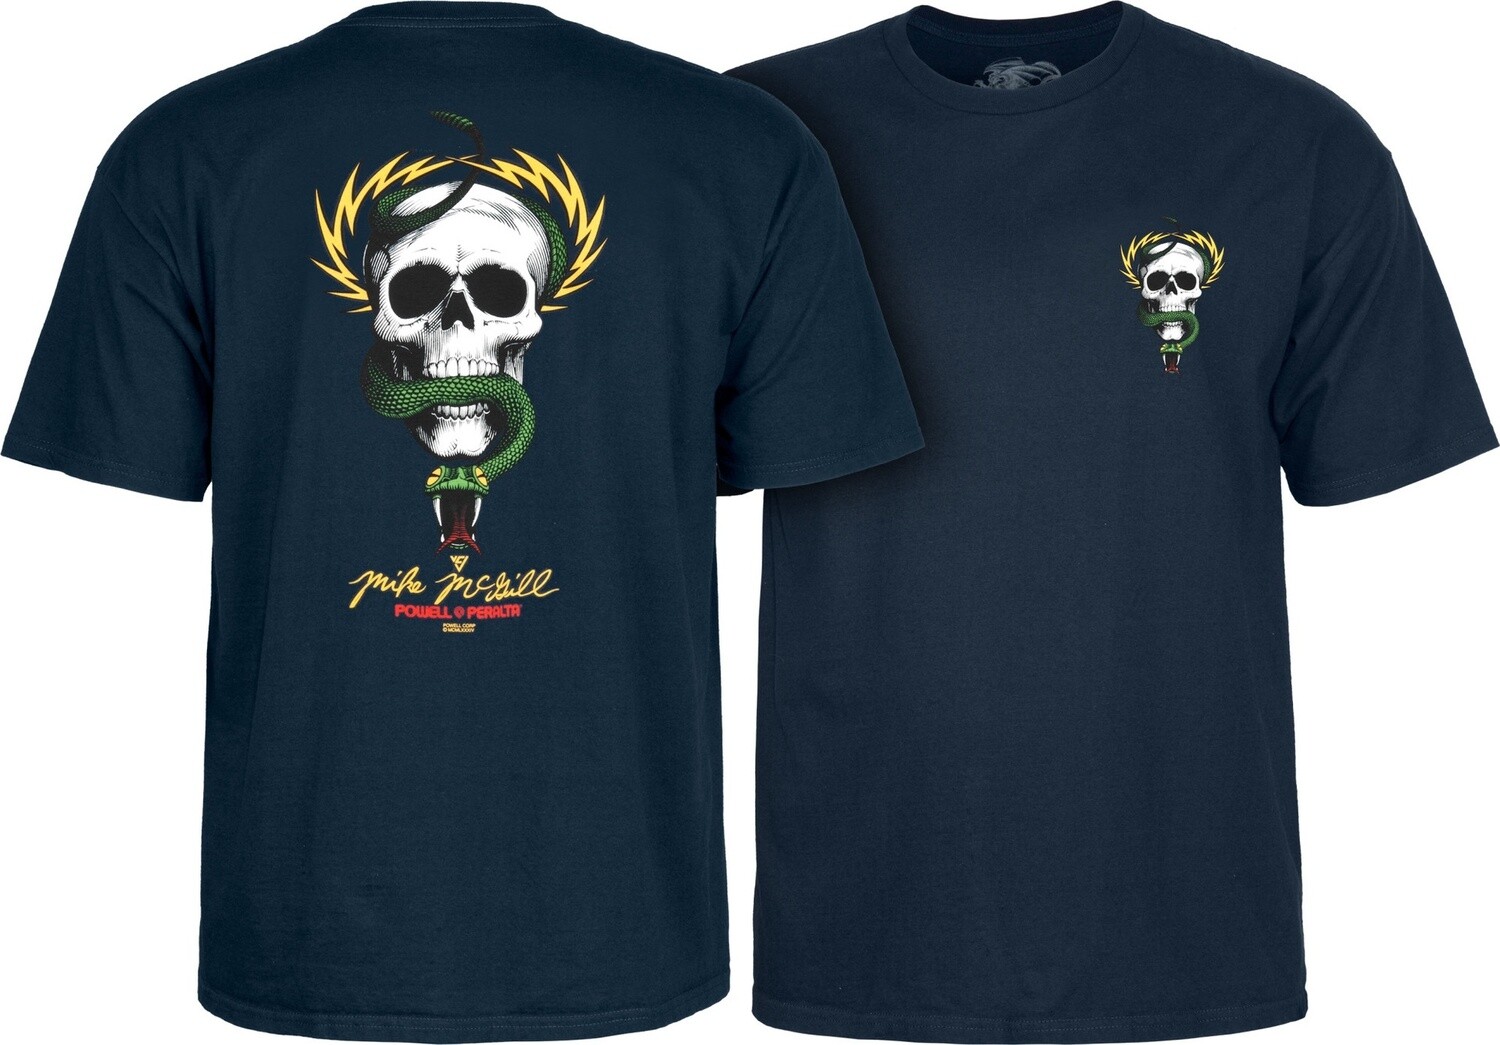 Powell Peralta Mike McGill Skull and Snake Navy T-shirt